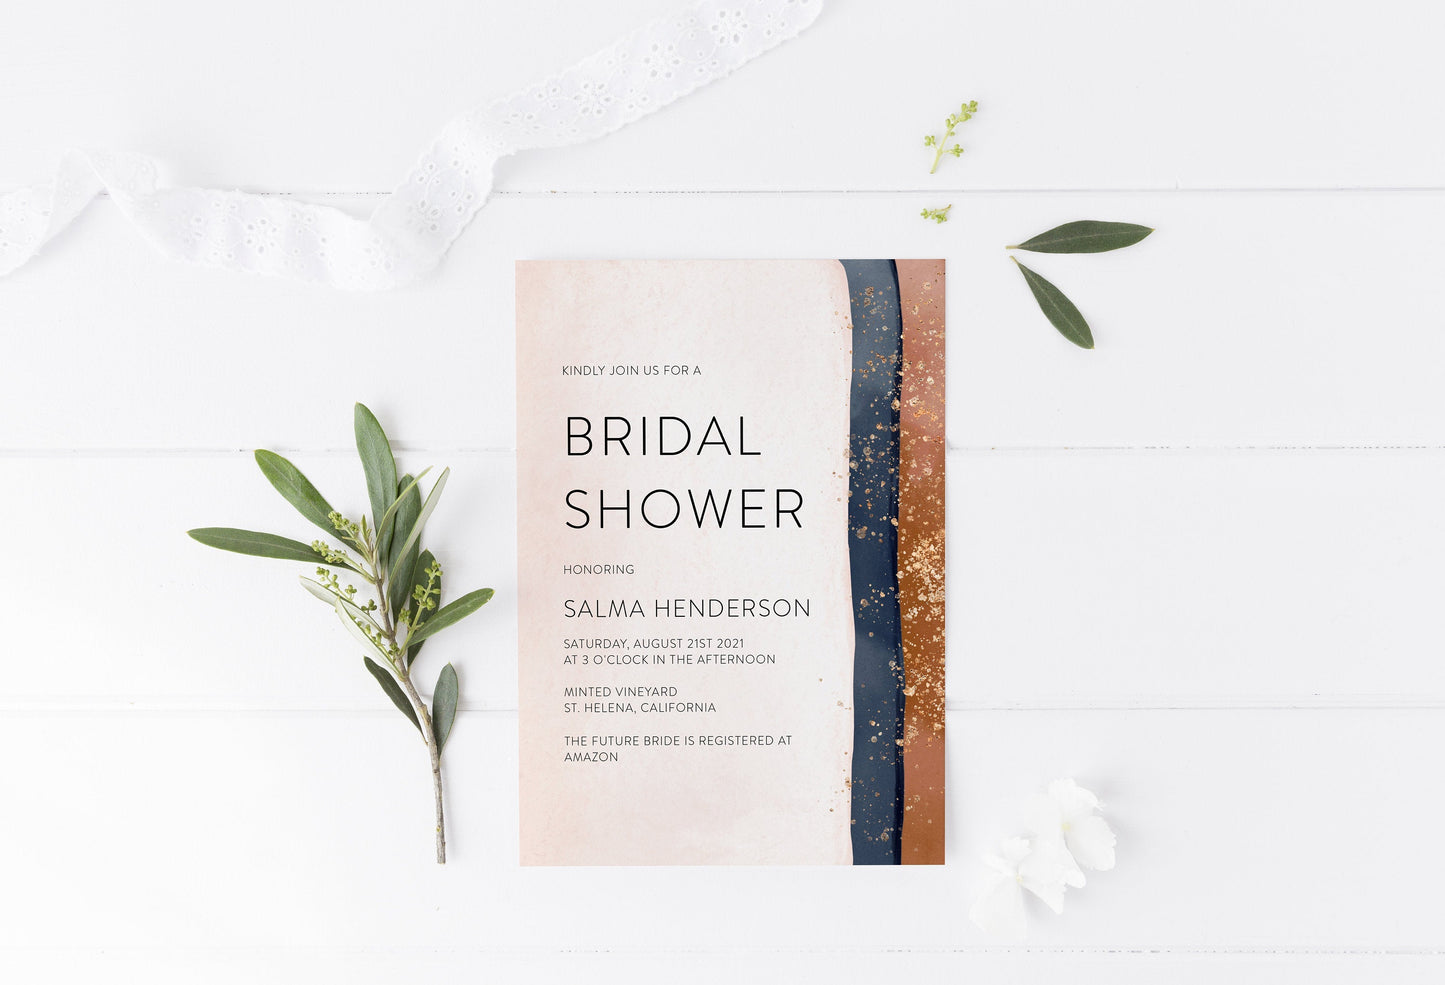 Modern Abstract Bridal Shower Invitation, DIY Editable Invite Template Instant Download Invites - Salma SHOWERS | BACHELORETTE SAVVY PAPER CO